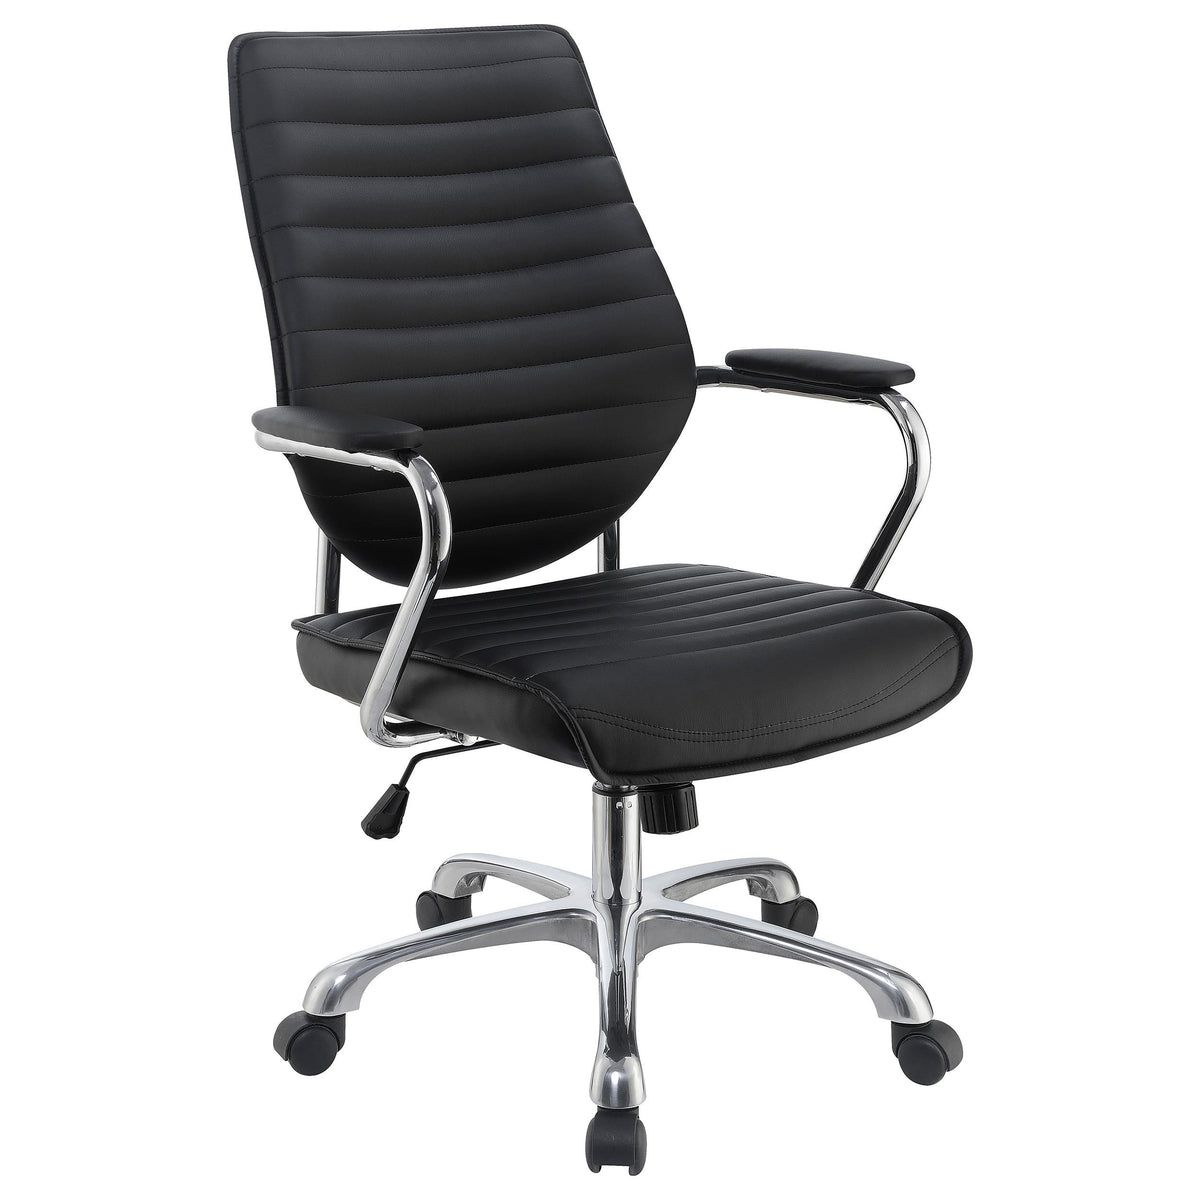 Chase High Back Office Chair Black and Chrome Chase High Back Office Chair Black and Chrome Half Price Furniture